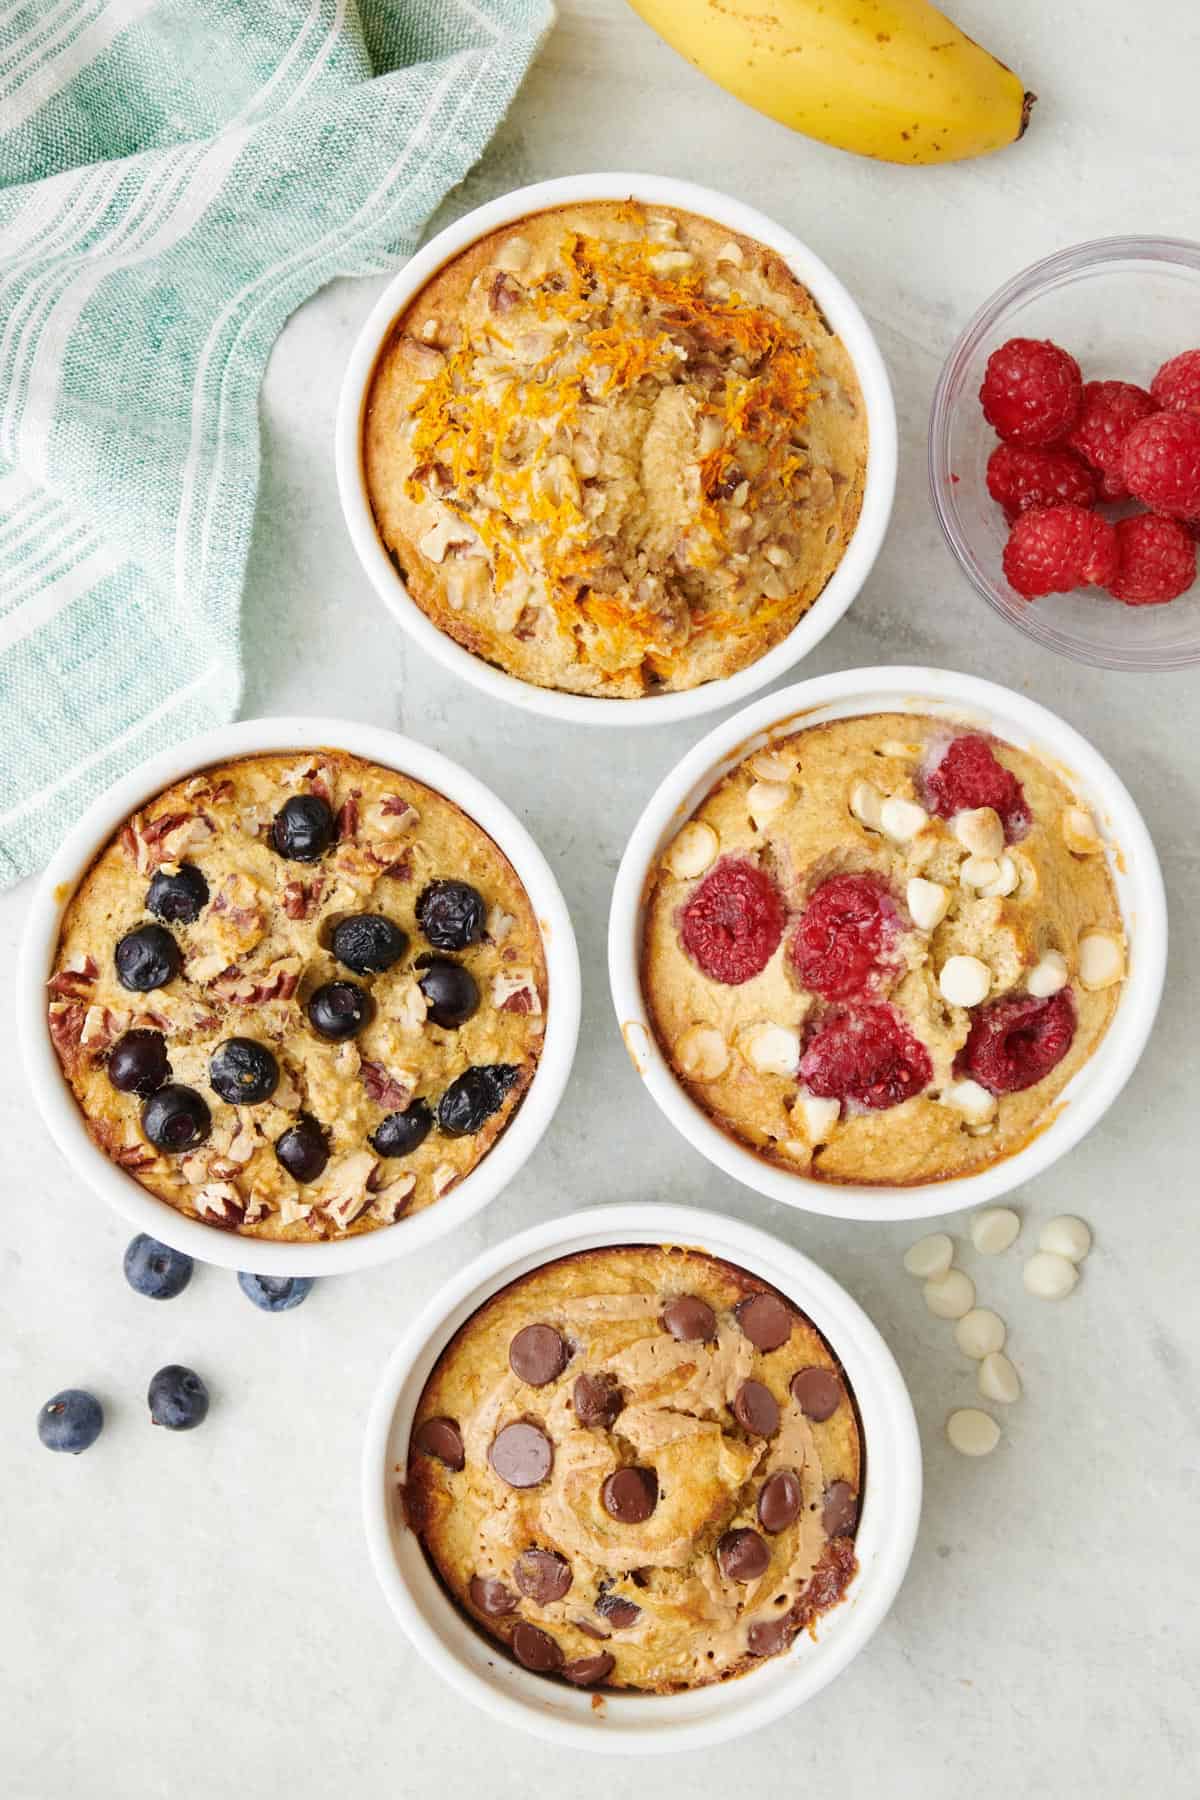 4 Baked oats with protein after baking